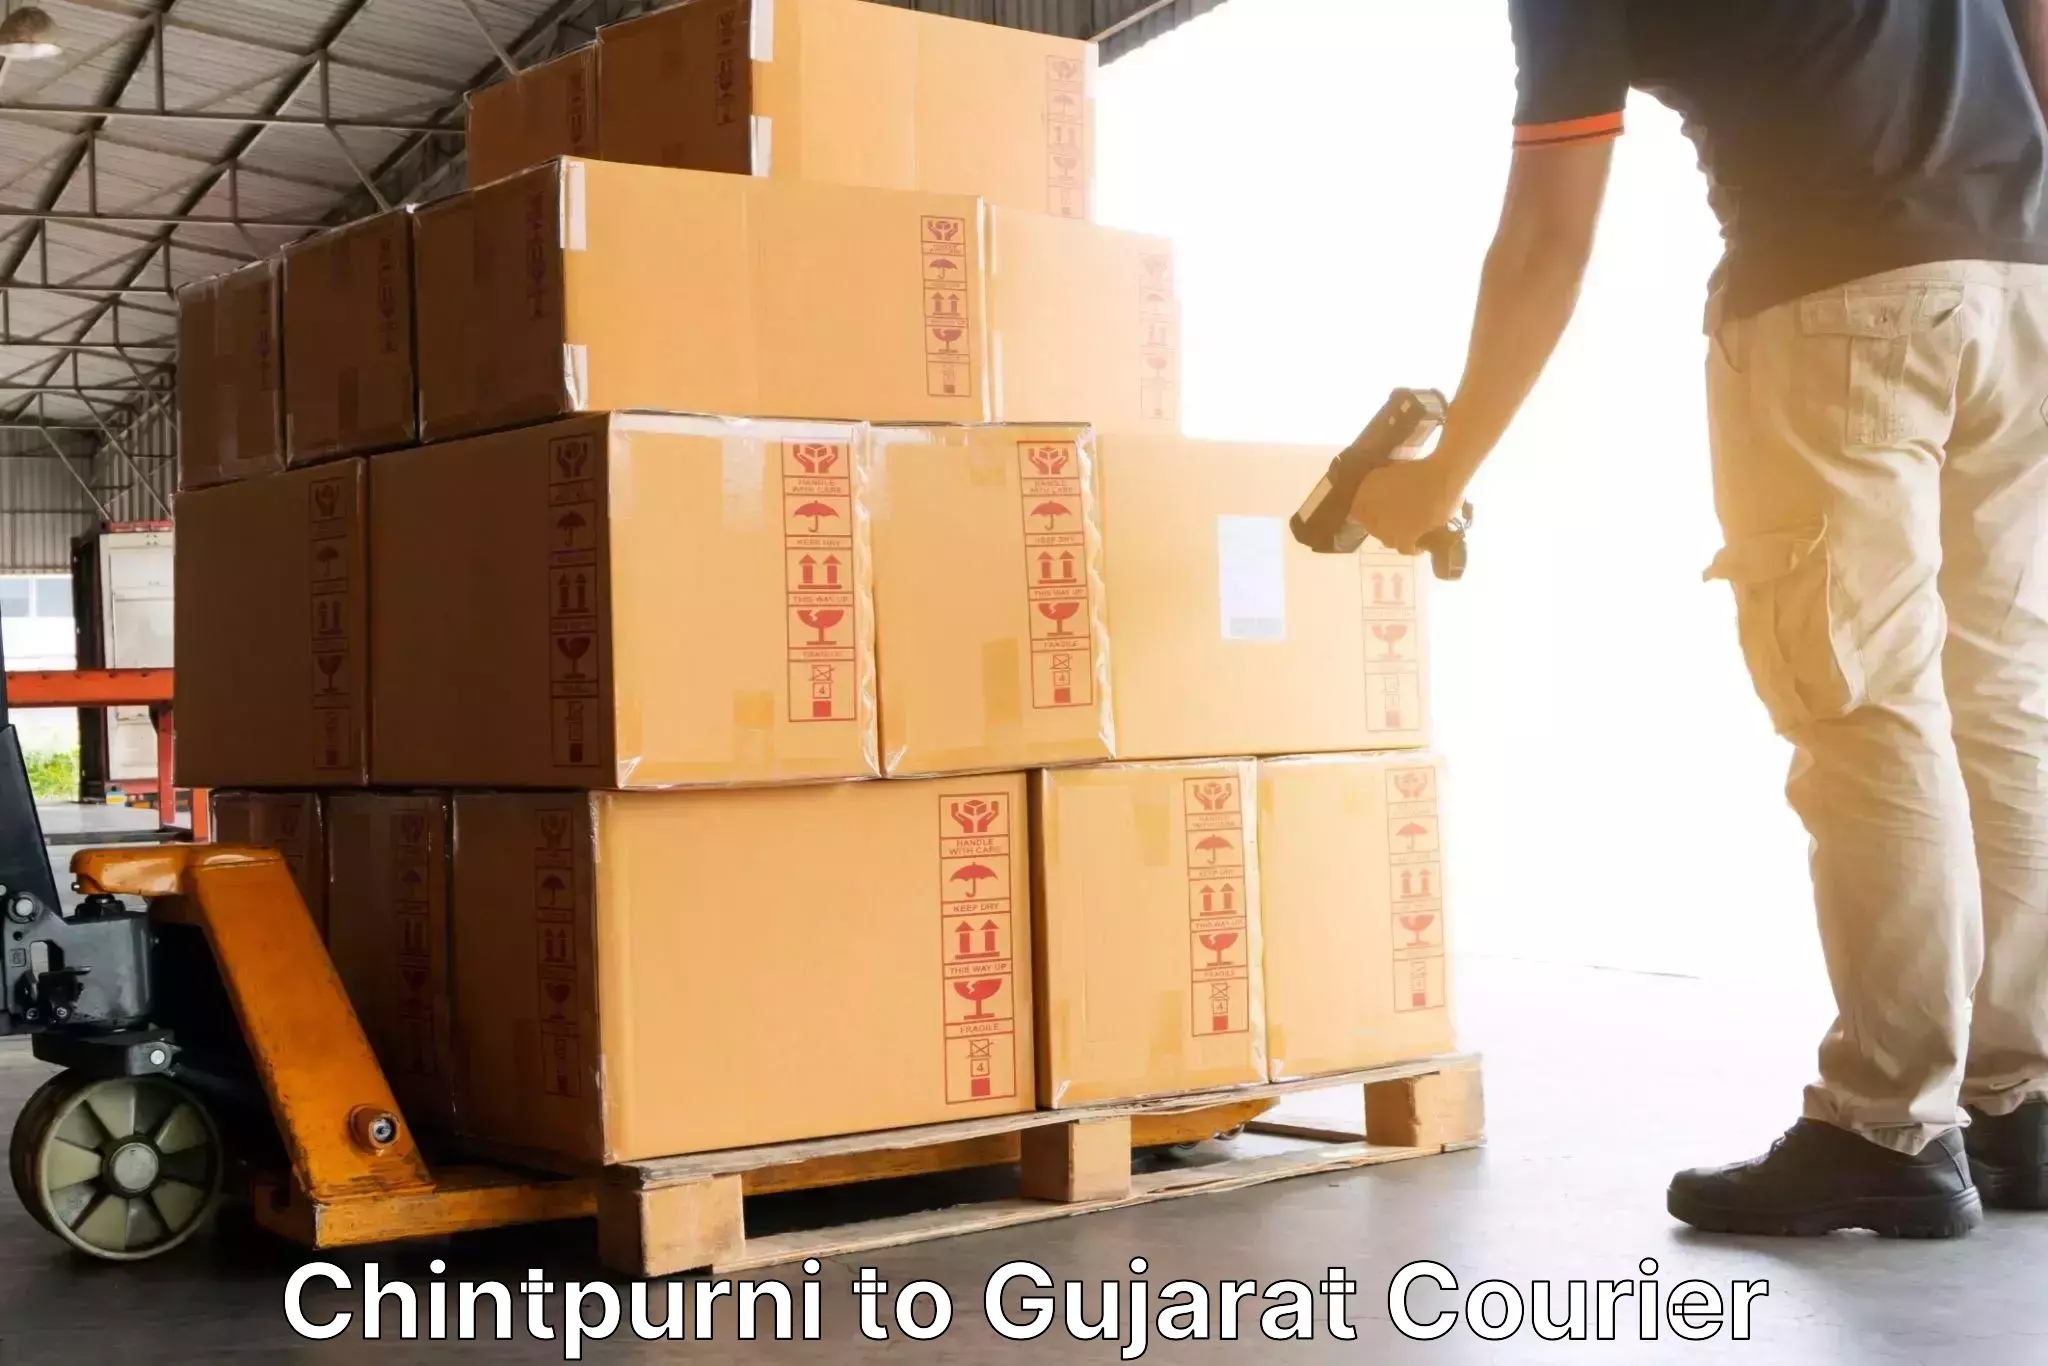 Customer-oriented courier services Chintpurni to Gujarat